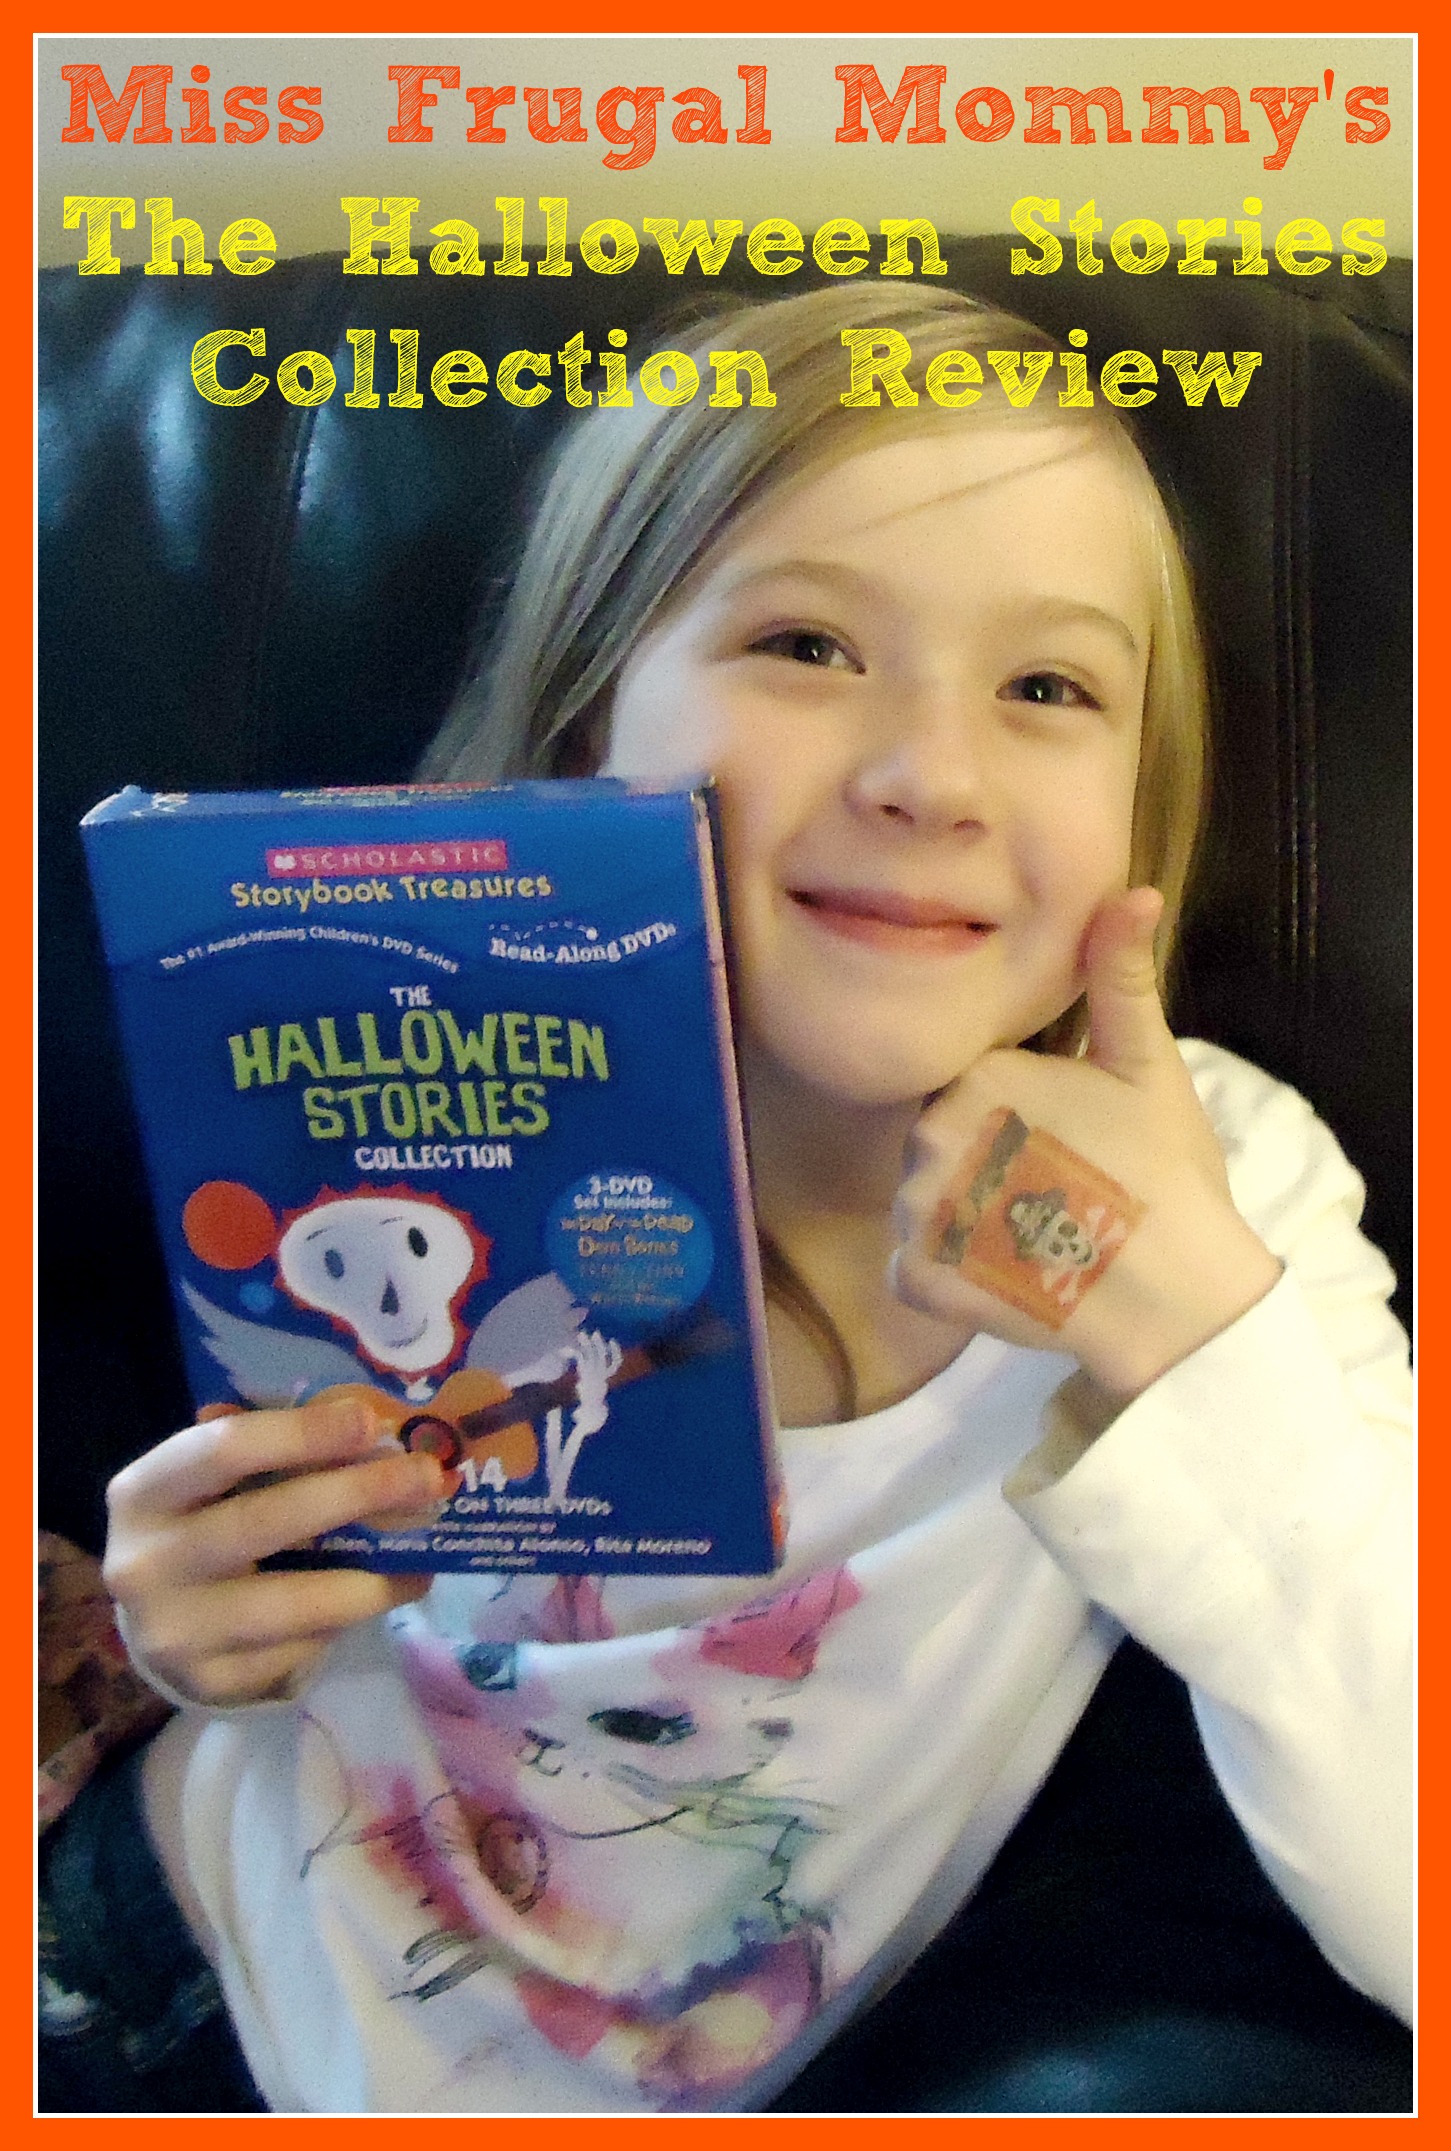 The Halloween Stories Collection From Scholastic Storybook Treasures: Review